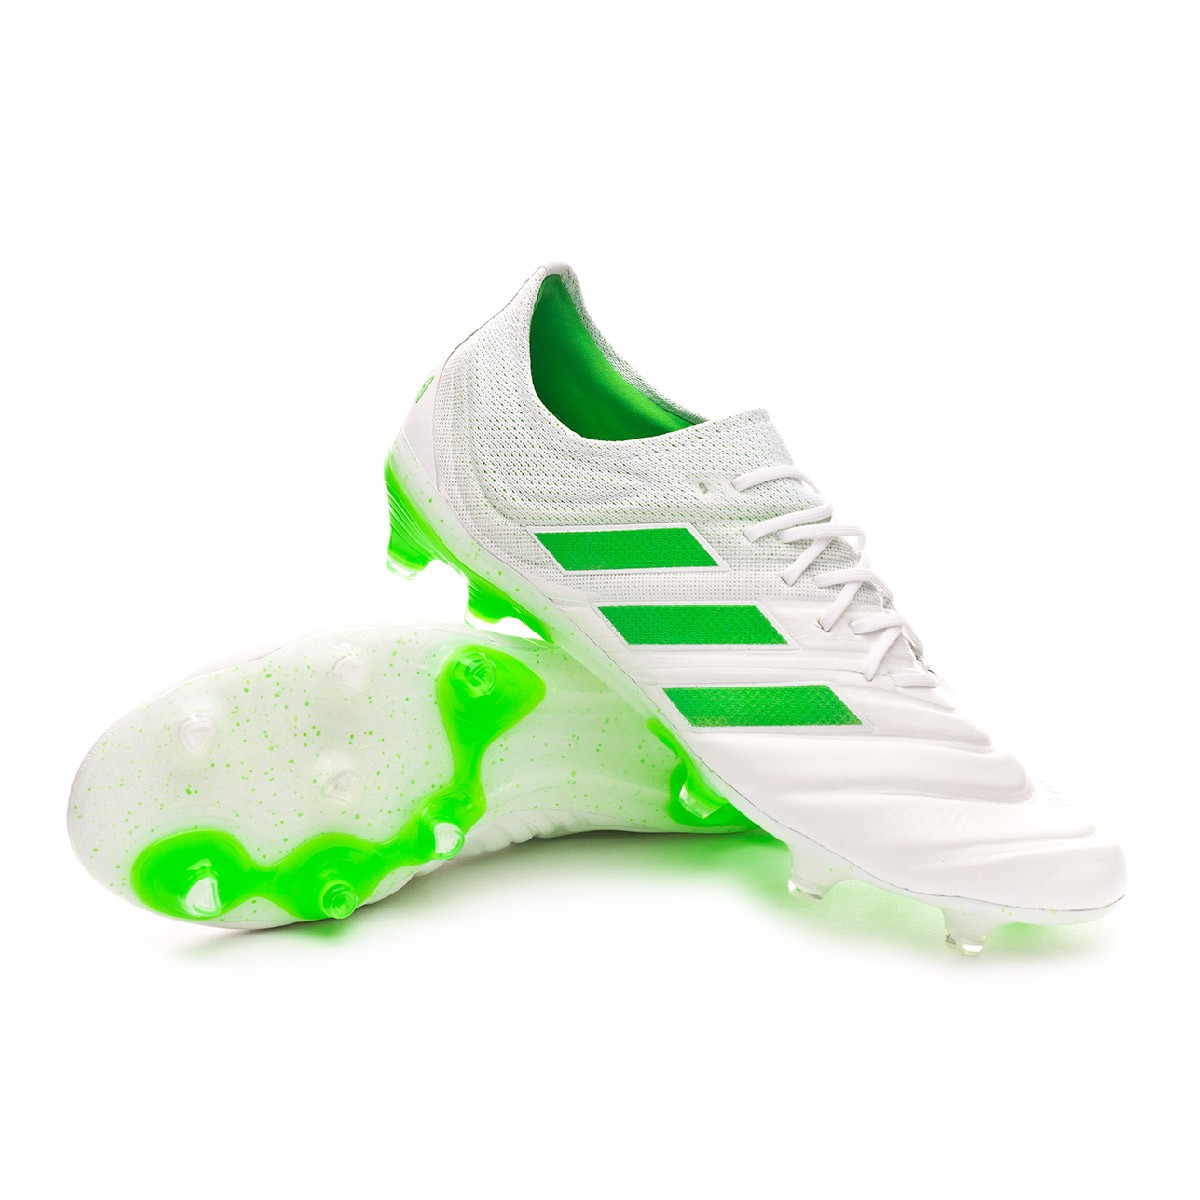 adidas copa 19.1 white and green Off 73 